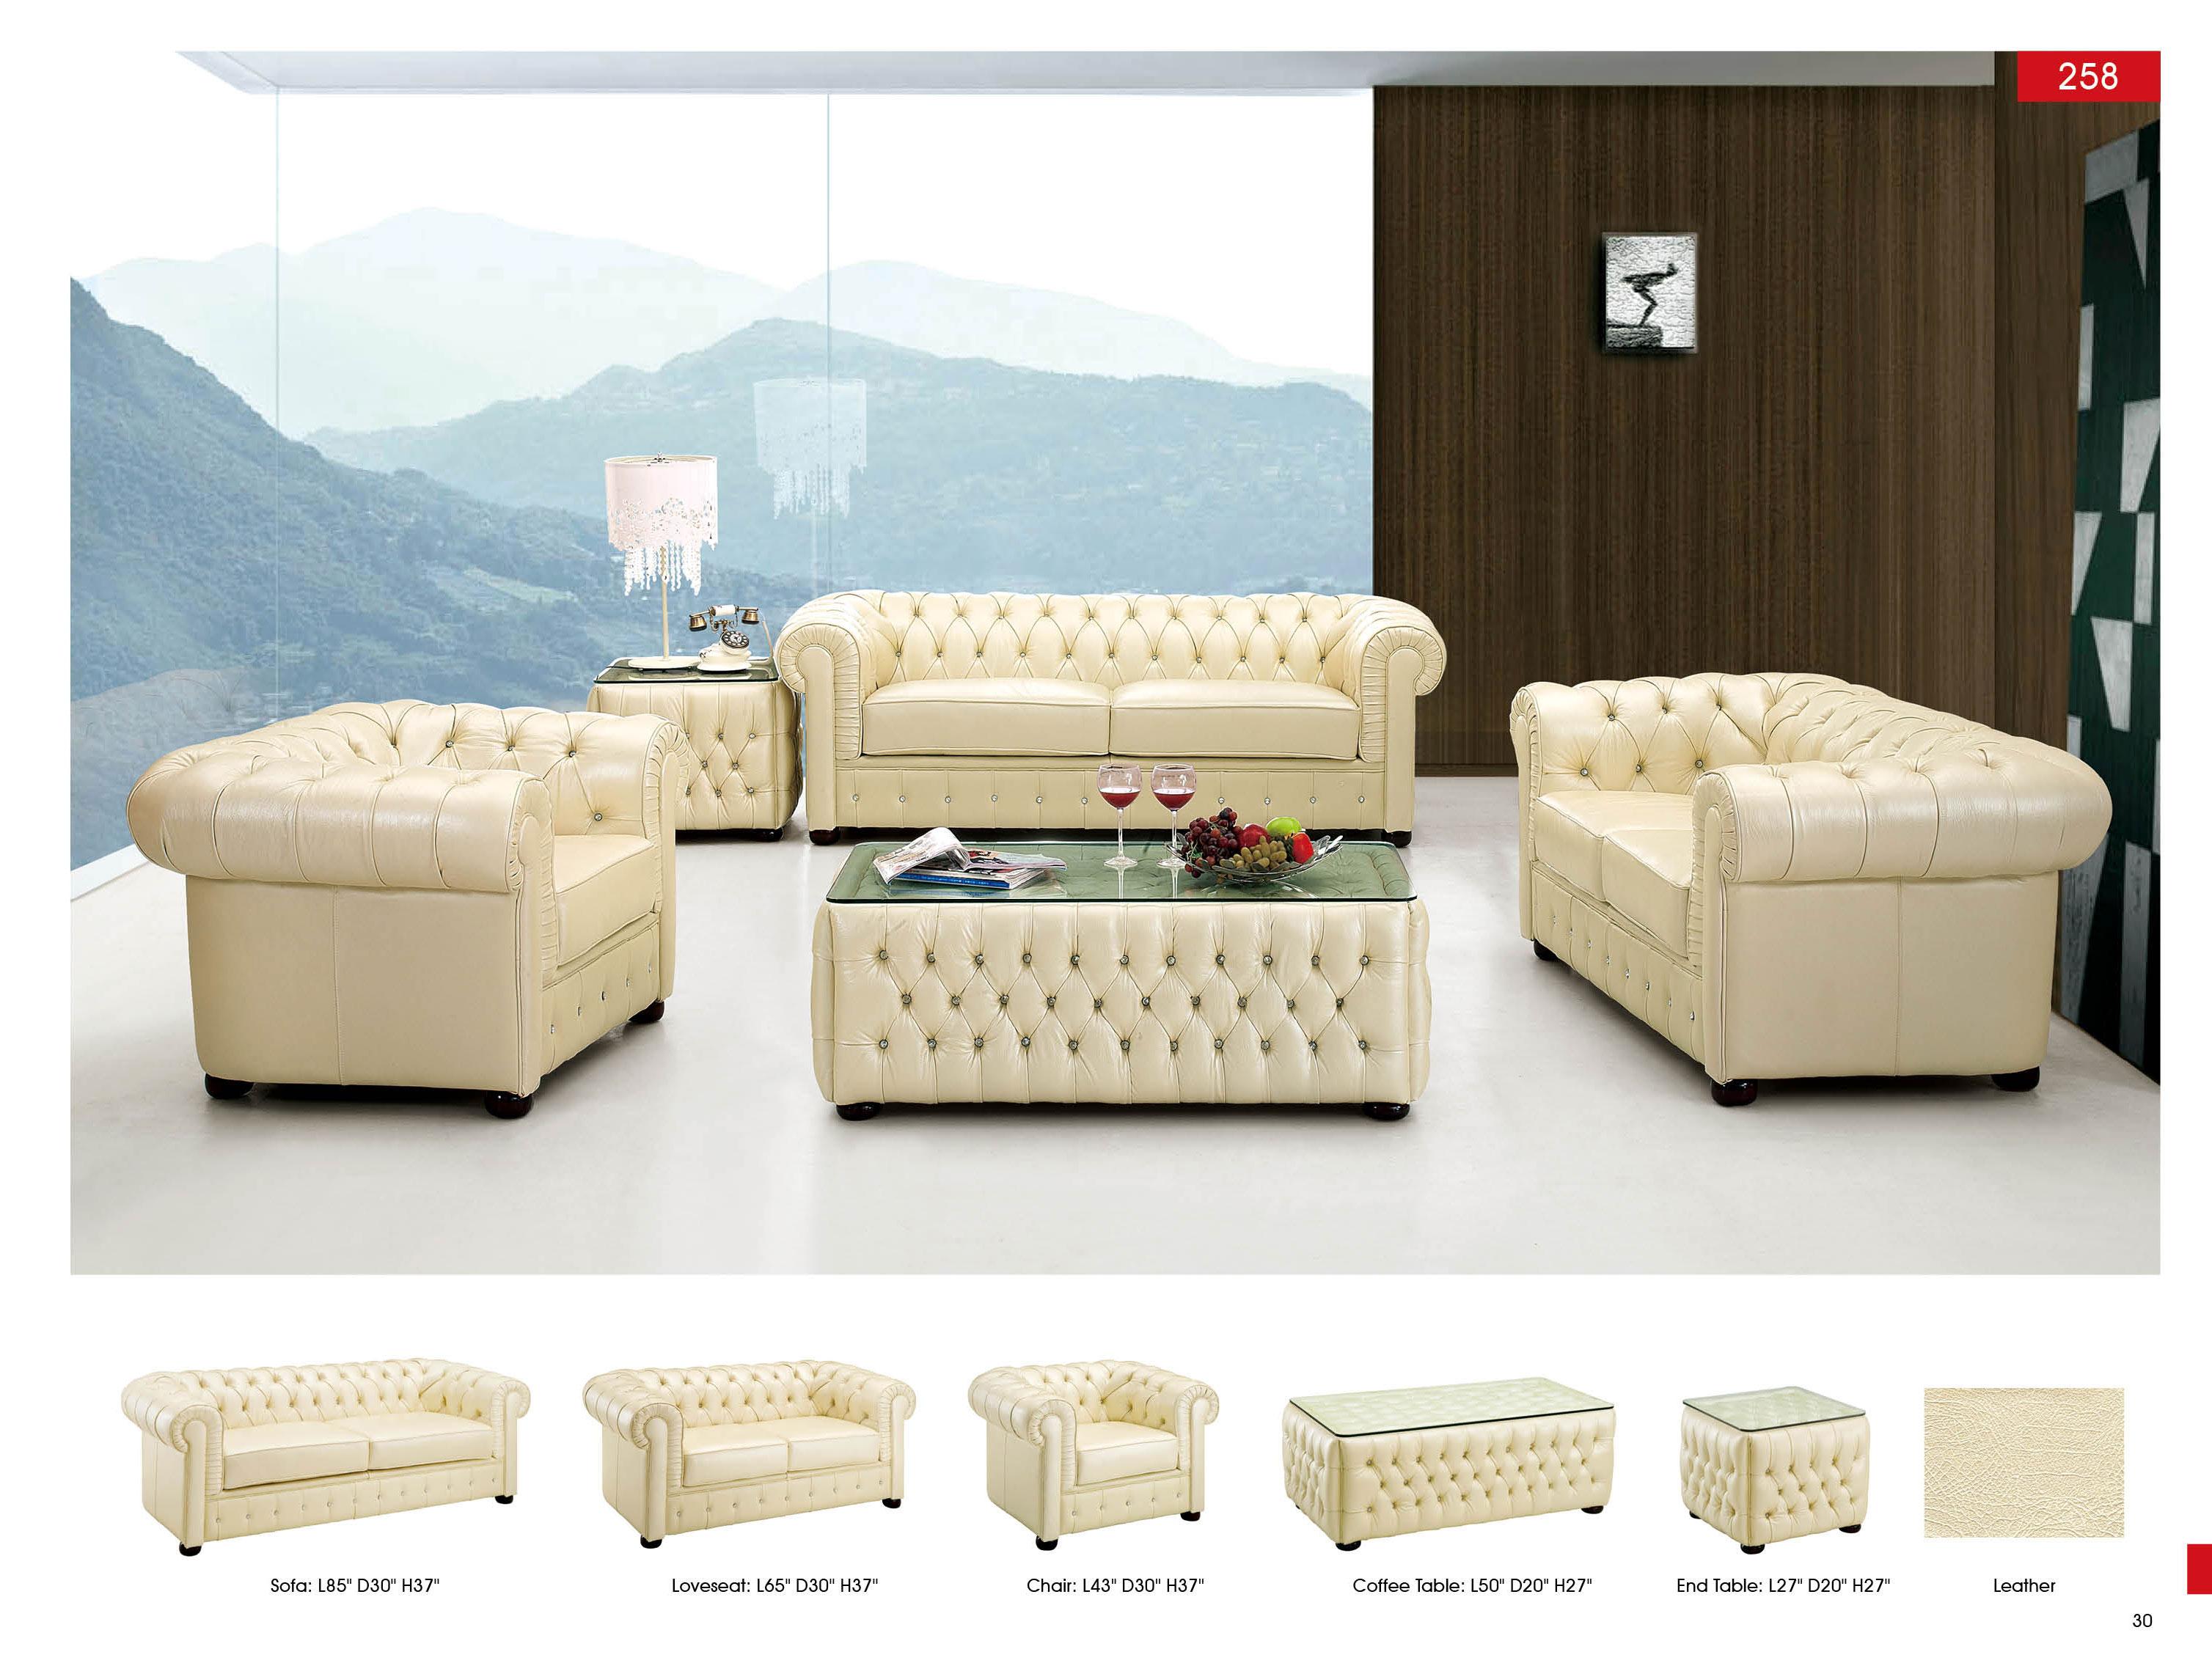 ESF 258 Sofa Loveseat Chair and Coffee Table